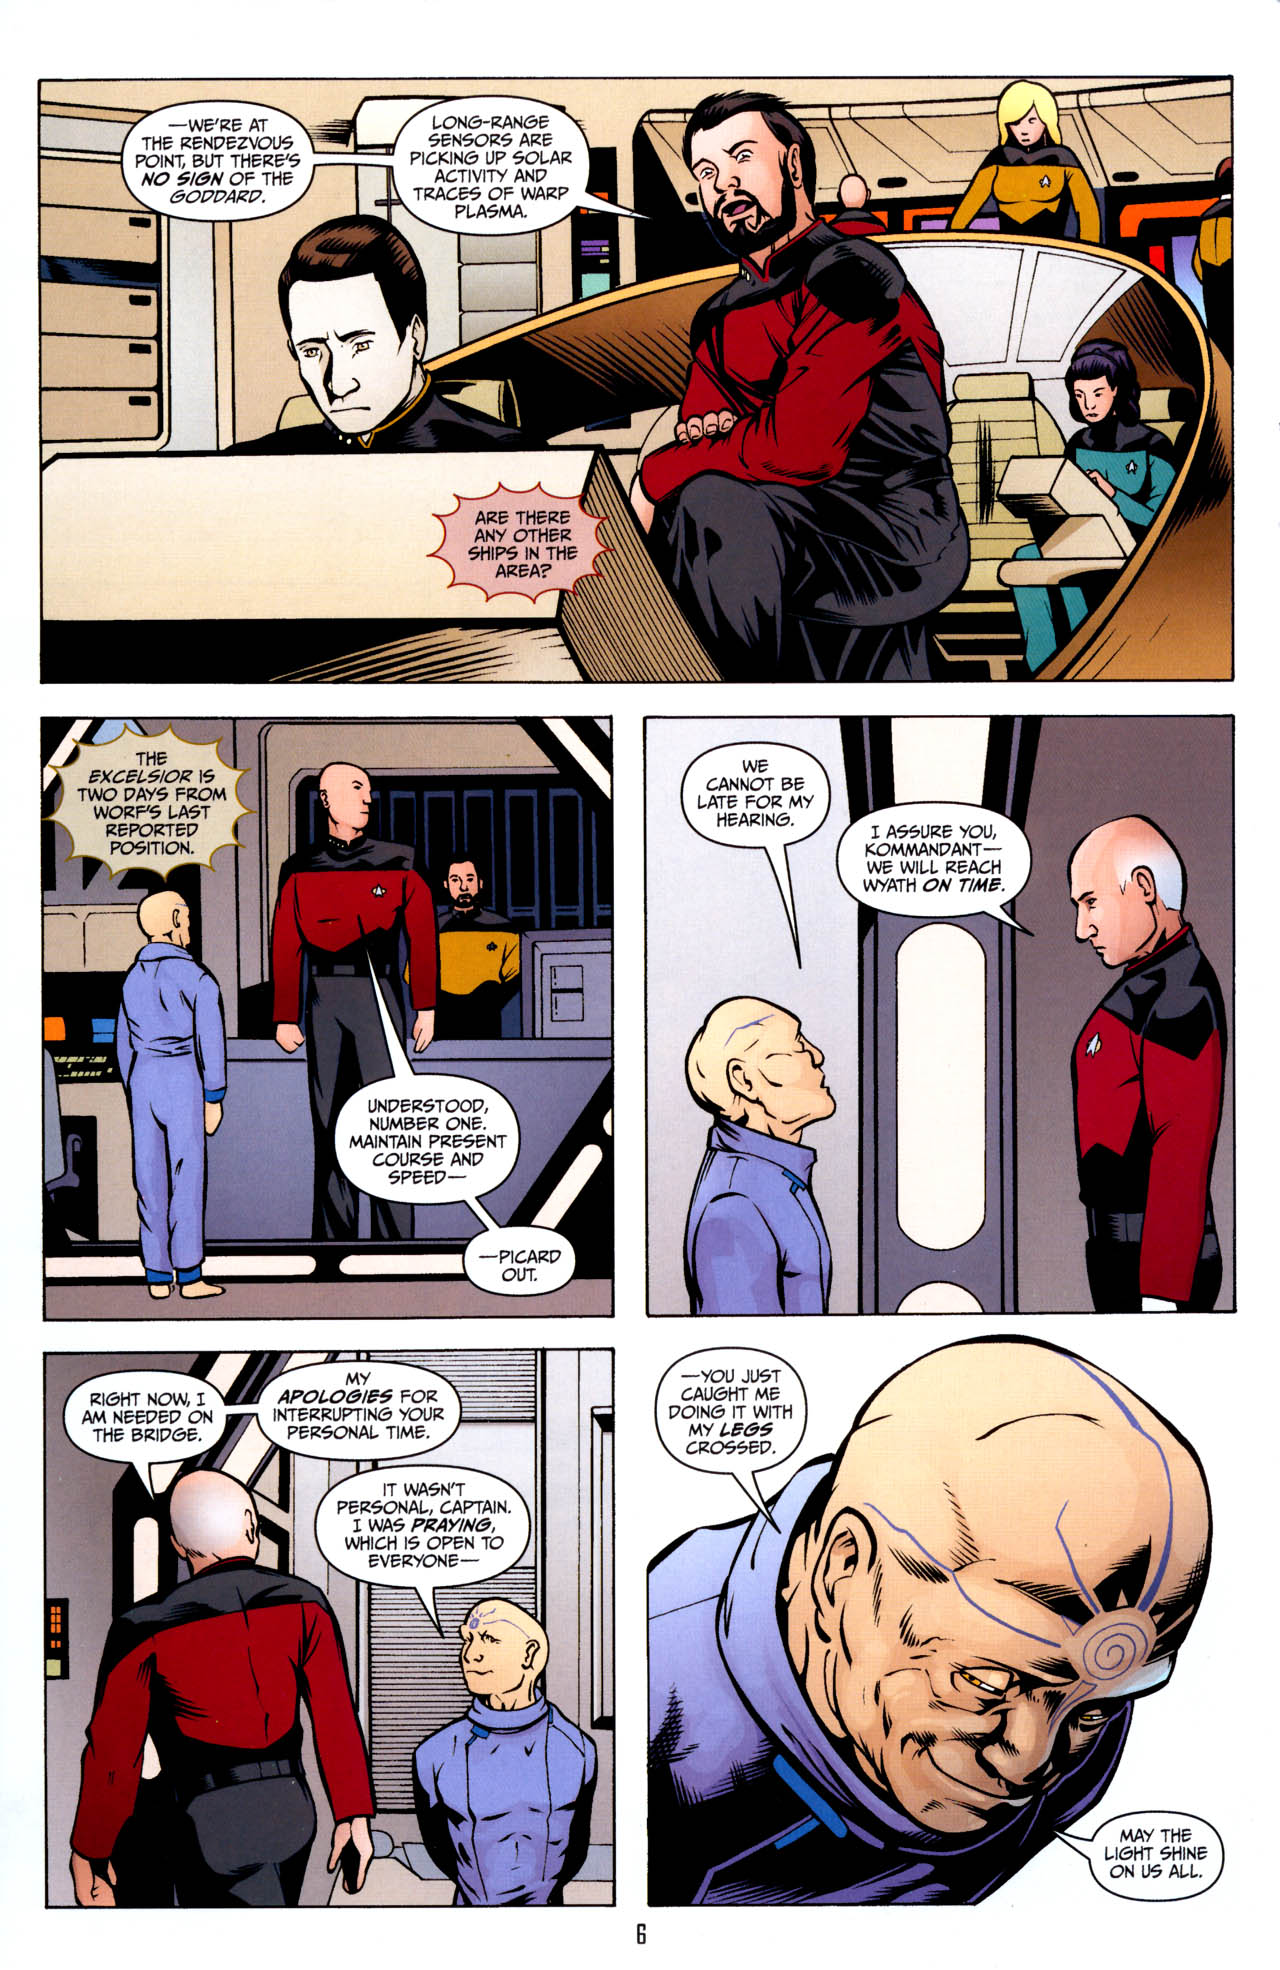 Read online Star Trek: The Next Generation: The Space Between comic -  Issue #4 - 8